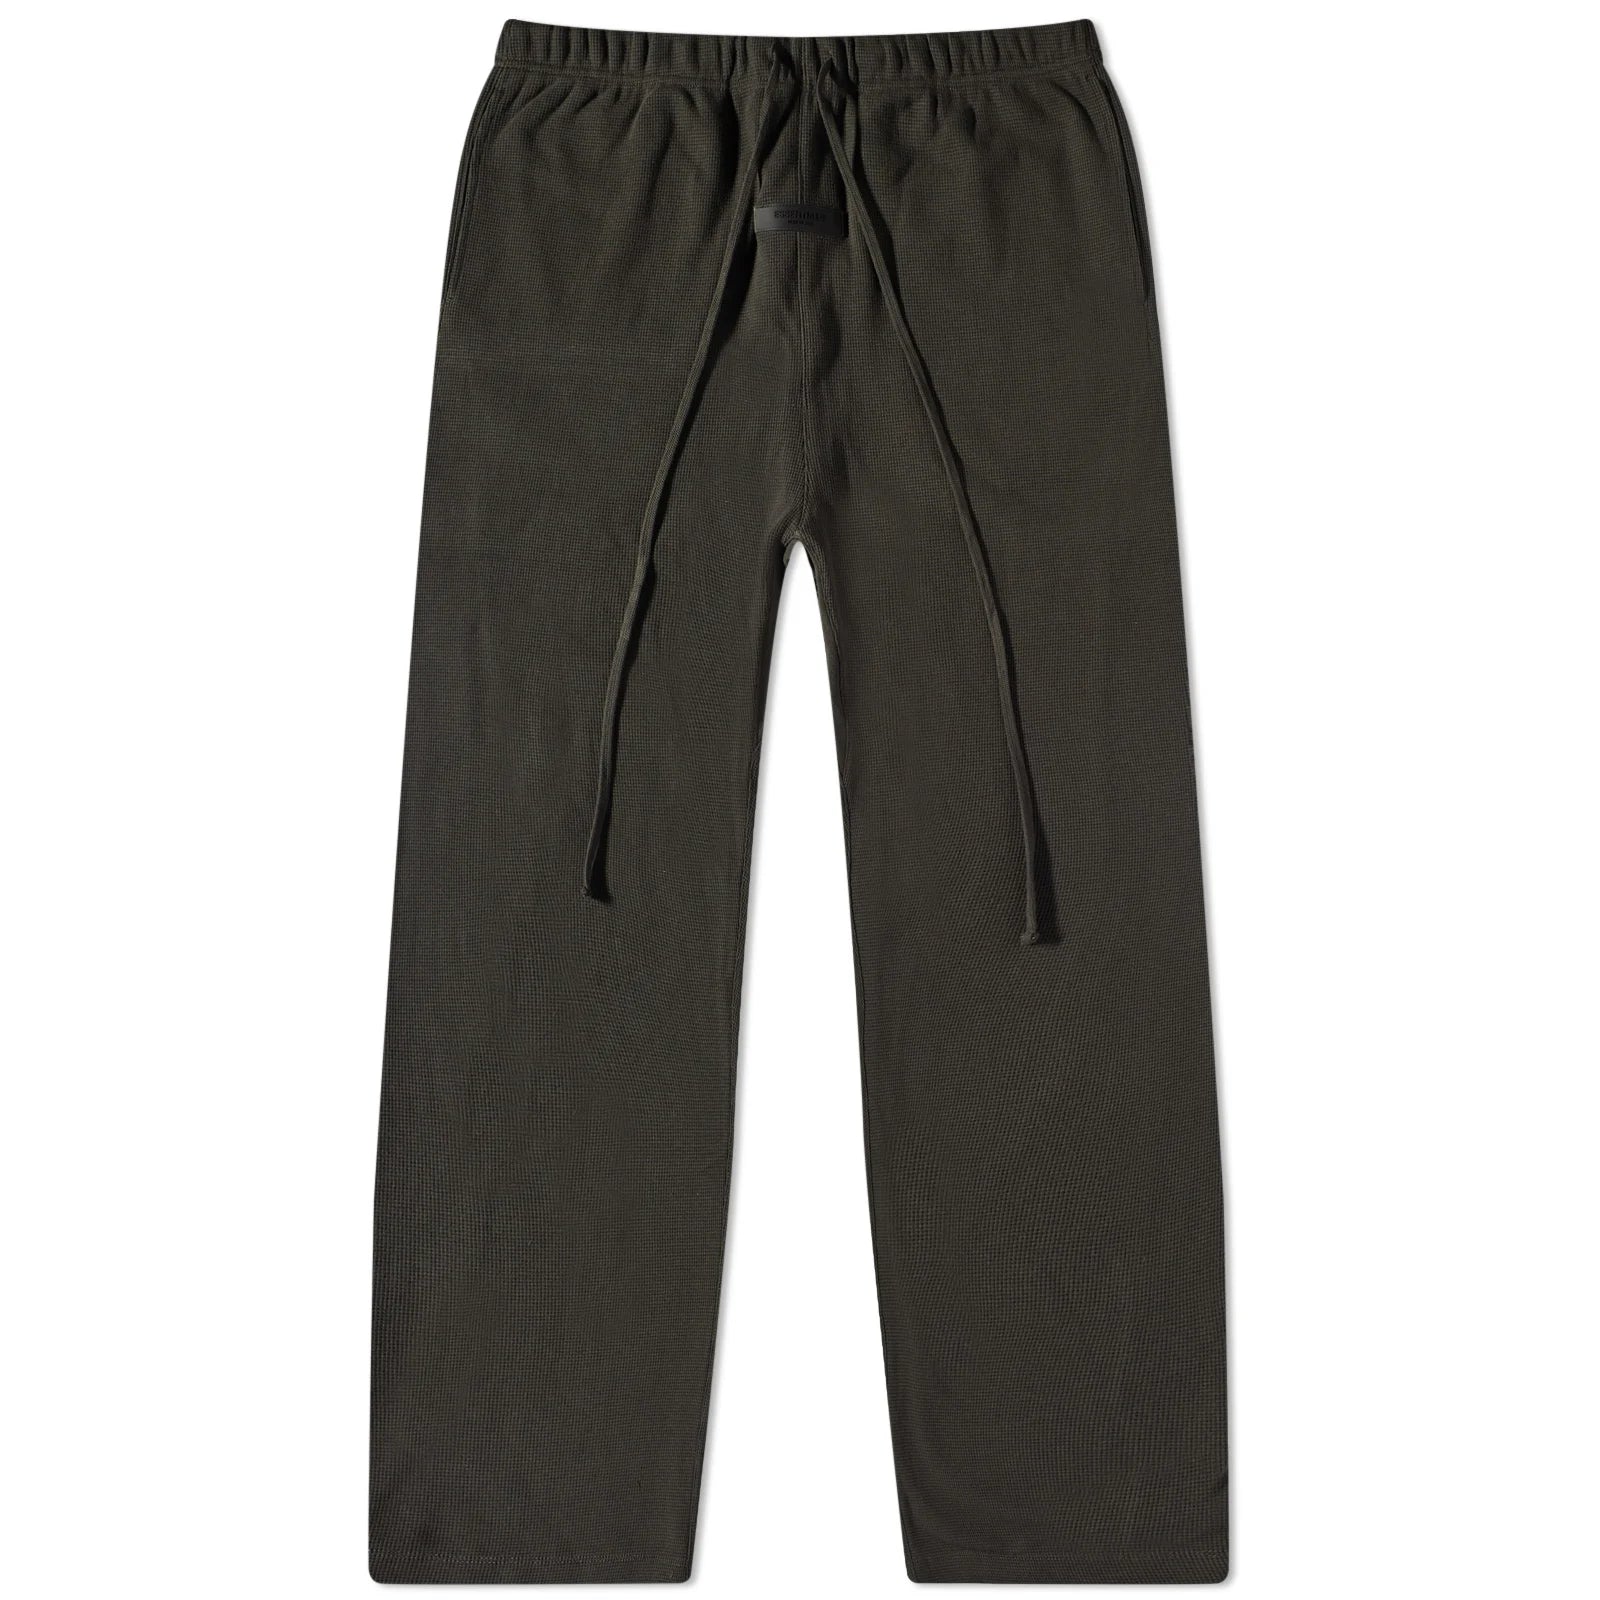 relaxed trouser - off black